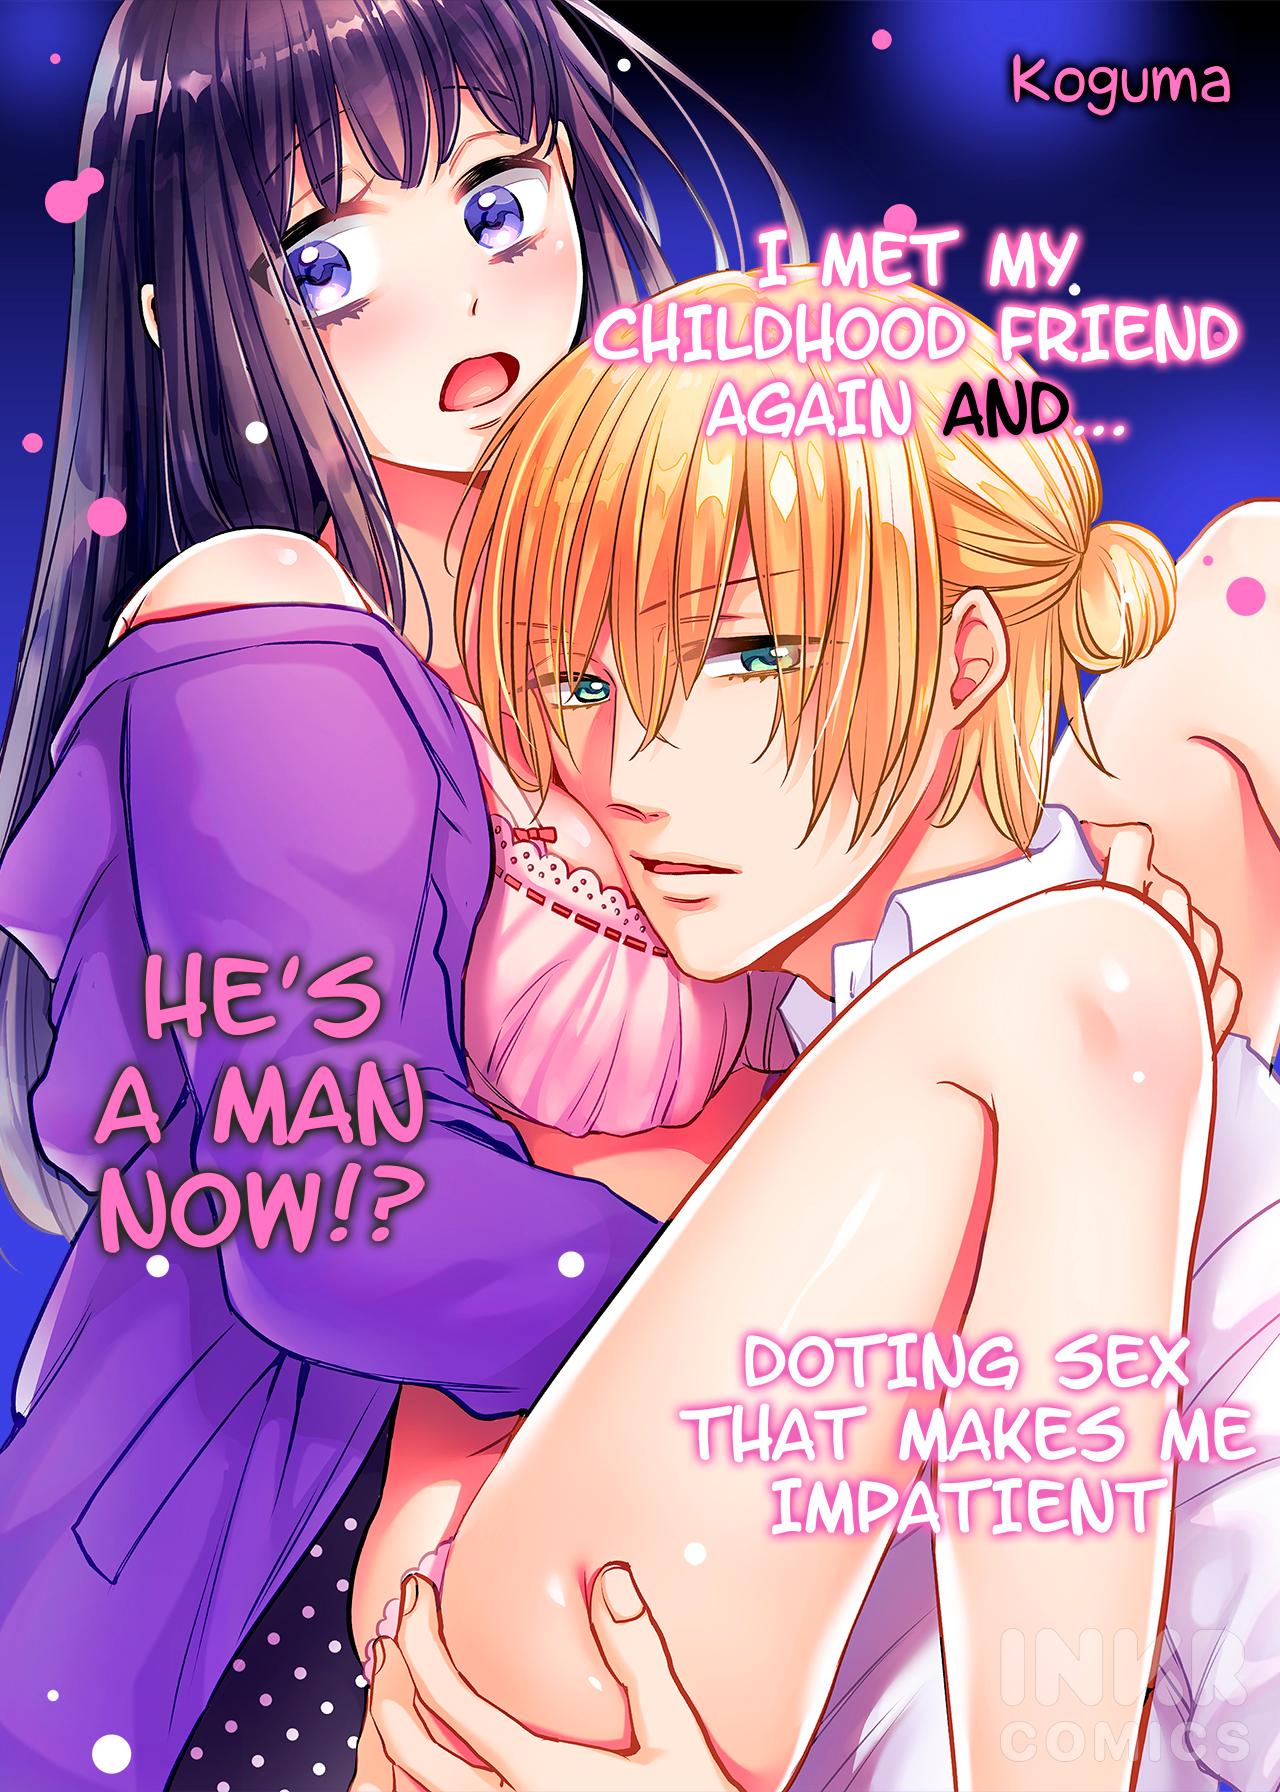 I Met My Childhood Friend Again And… He’S A Man Now!? Doting Sex That Makes Me Impatient - Page 1